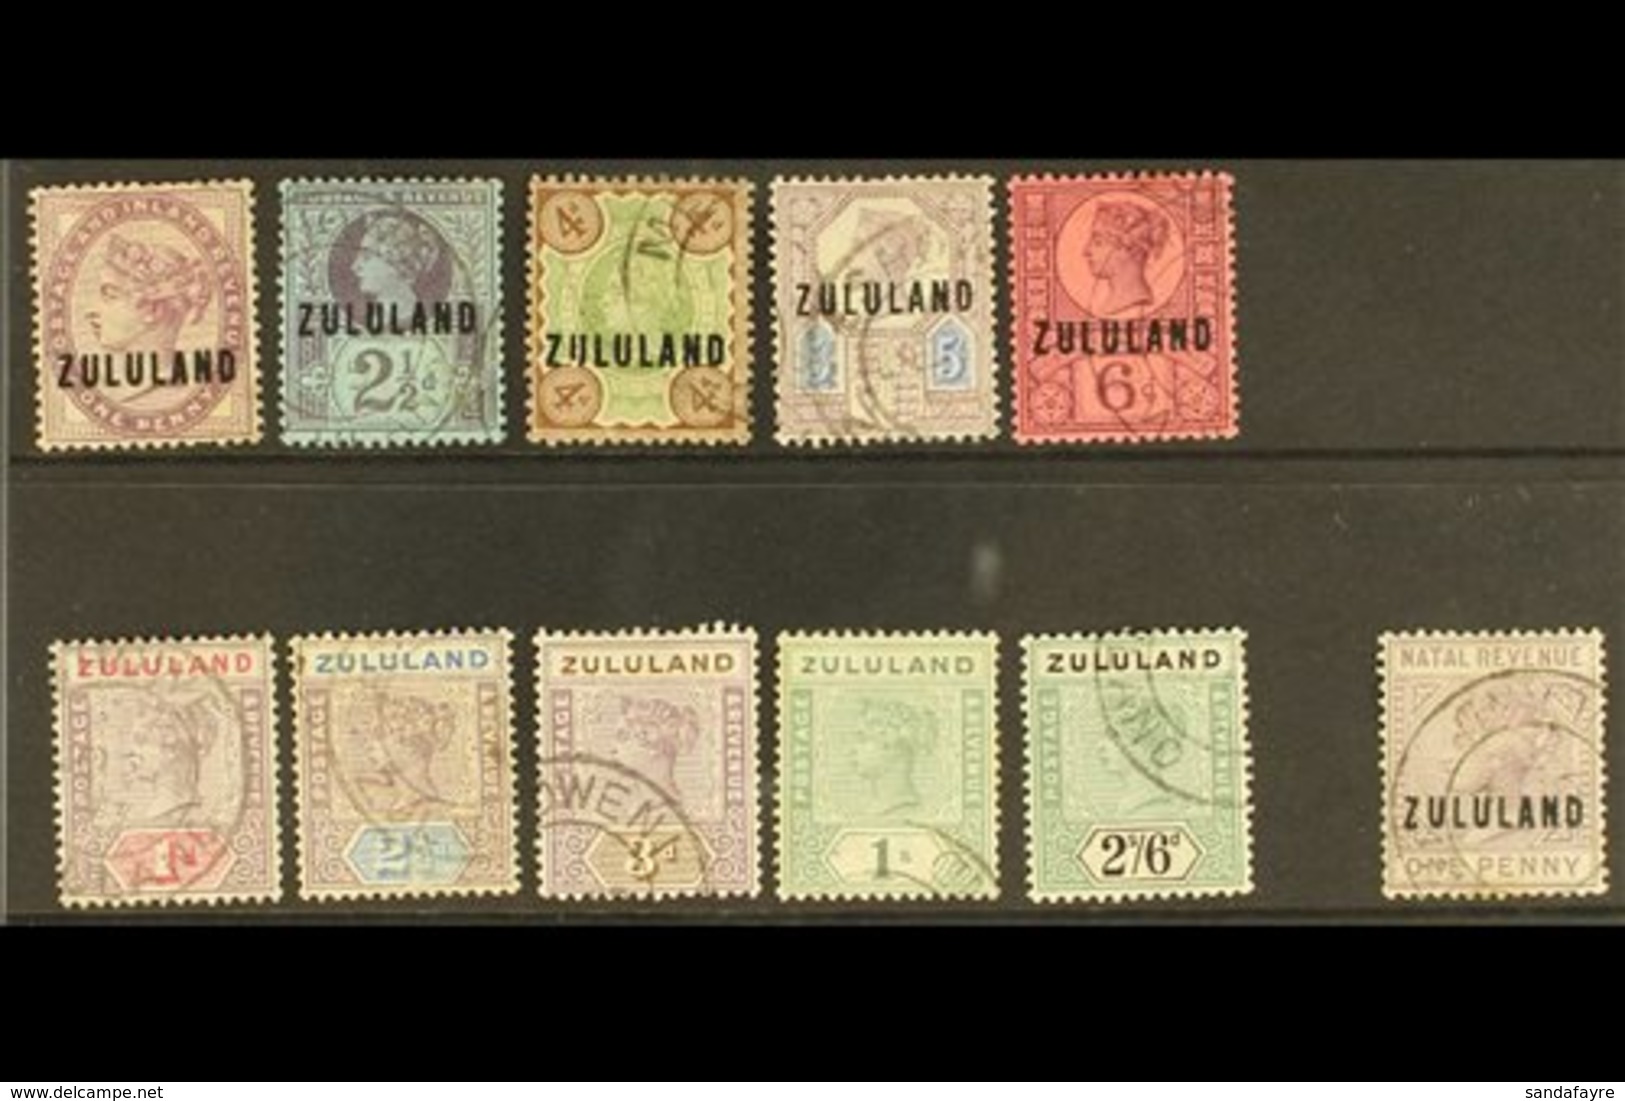 ZULULAND USED GROUP Incl. 1888-93 1d, 2½d, 4d To 6d, 1894-6 1d To 3d, 1s & 2s6d, 1891 1d Postal Fiscal, Mixed Condition, - Unclassified